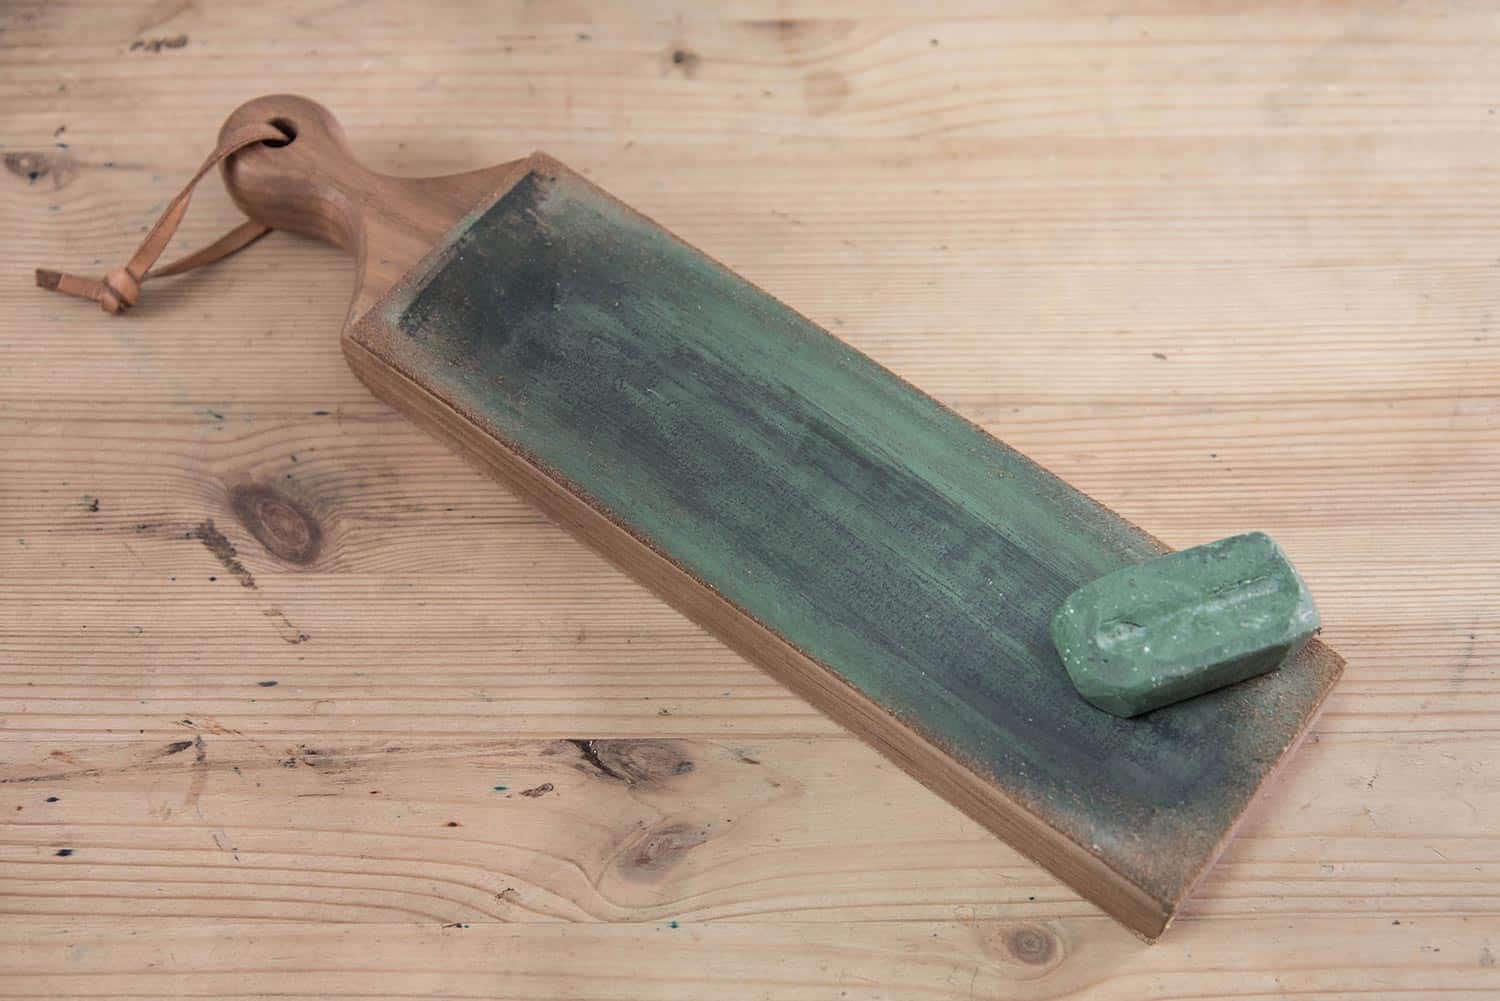 Leather knife strop with green polishing compound on a wooden surface